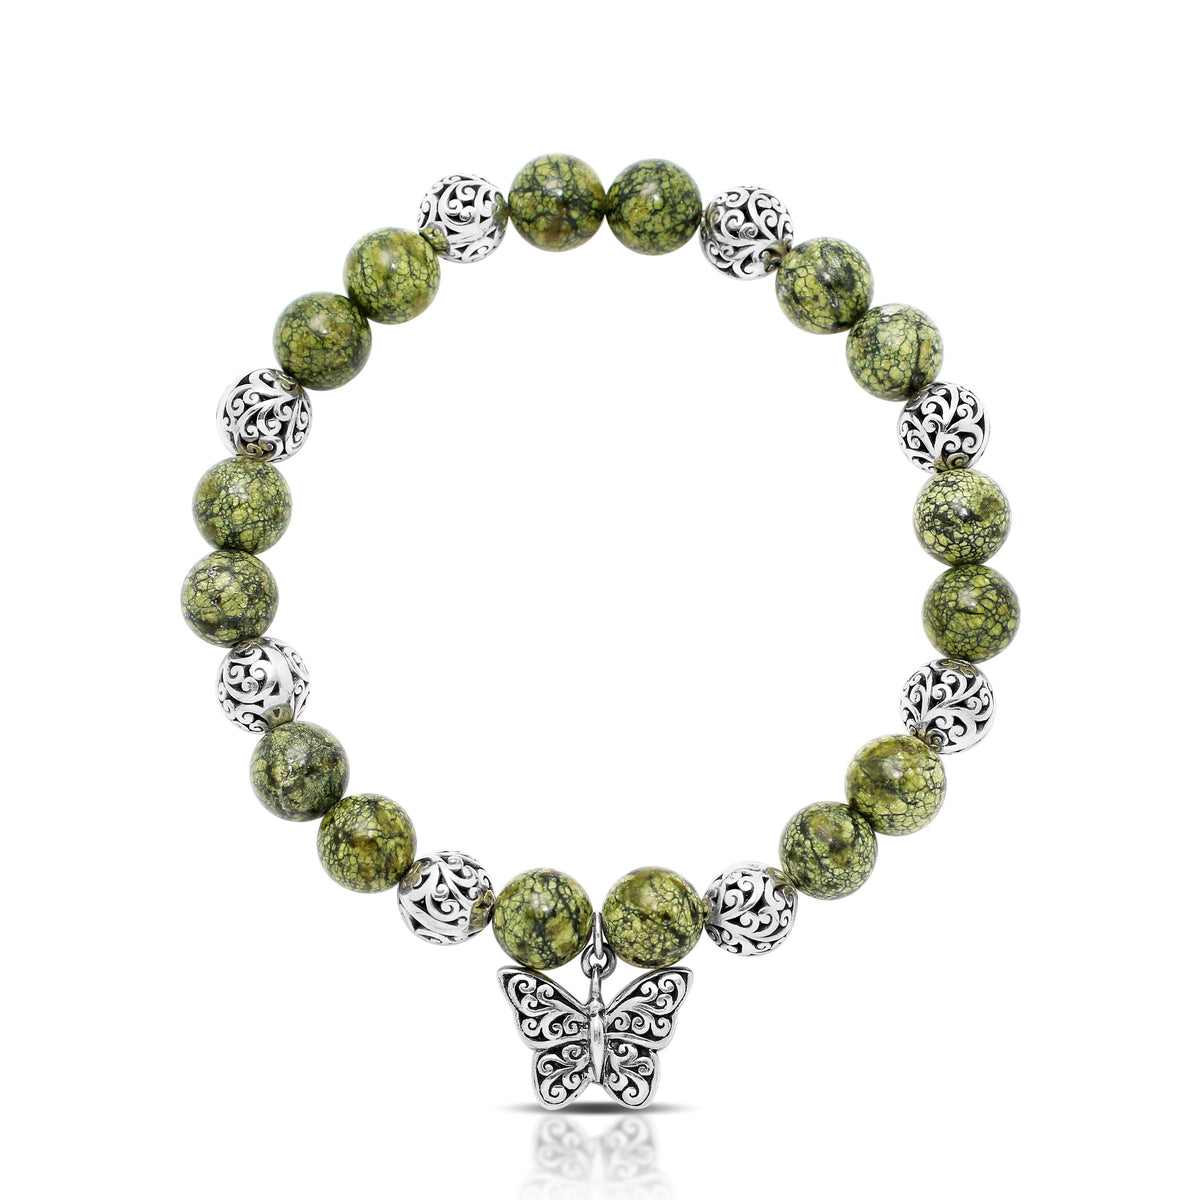 Green Turquoise Bead (8mm) with Scroll Sterling Silver Bead and Butterfly Hang Stretch Bracelet